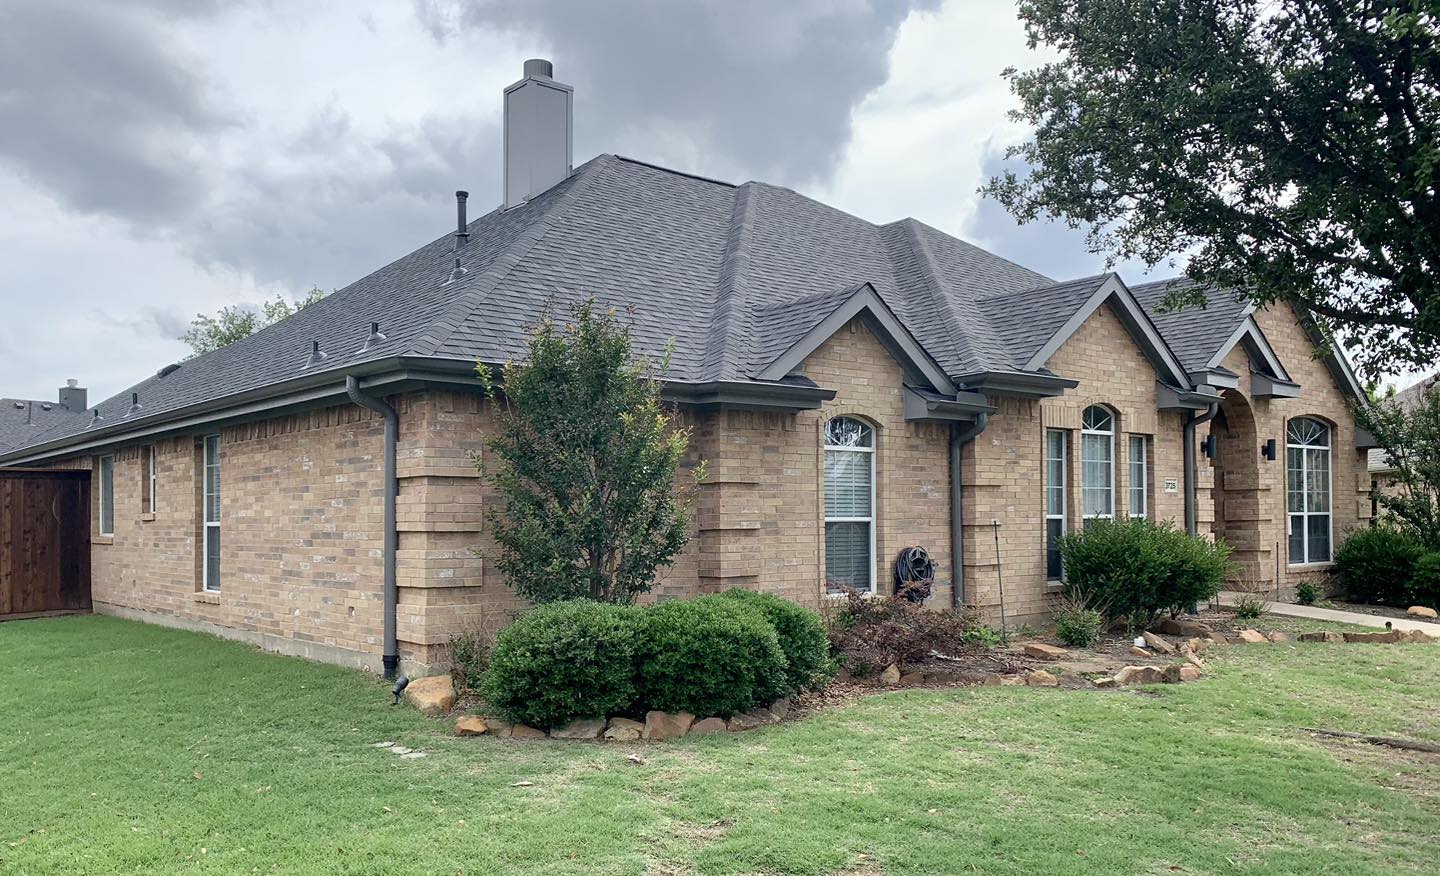 Home in the DFW metroplex with half-round rain gutters